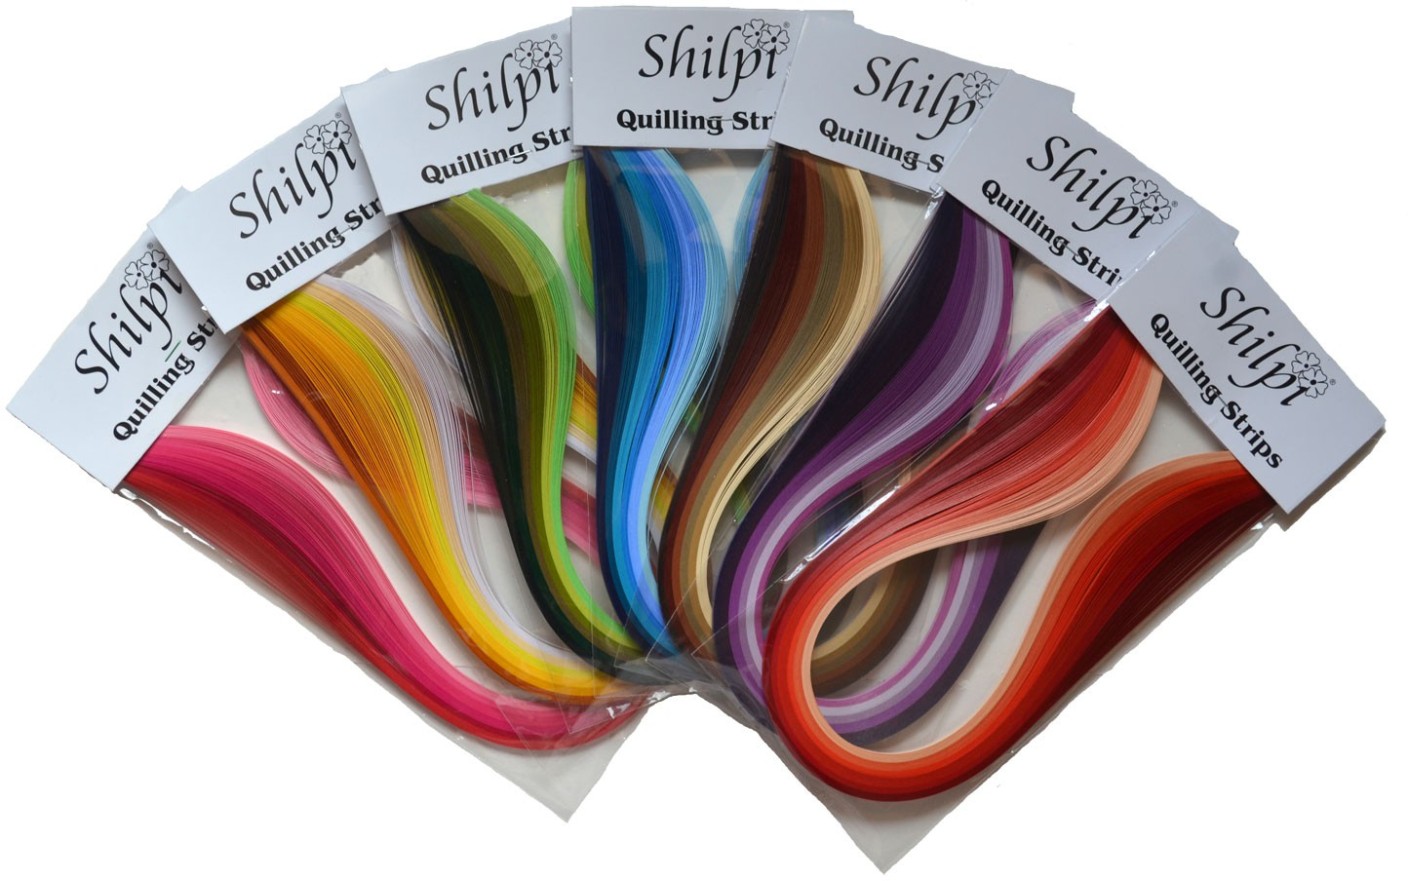 Shilpi Quilling Strips Family Packs 3mm (700 strips) Quilling Strips Family Packs 3mm (700